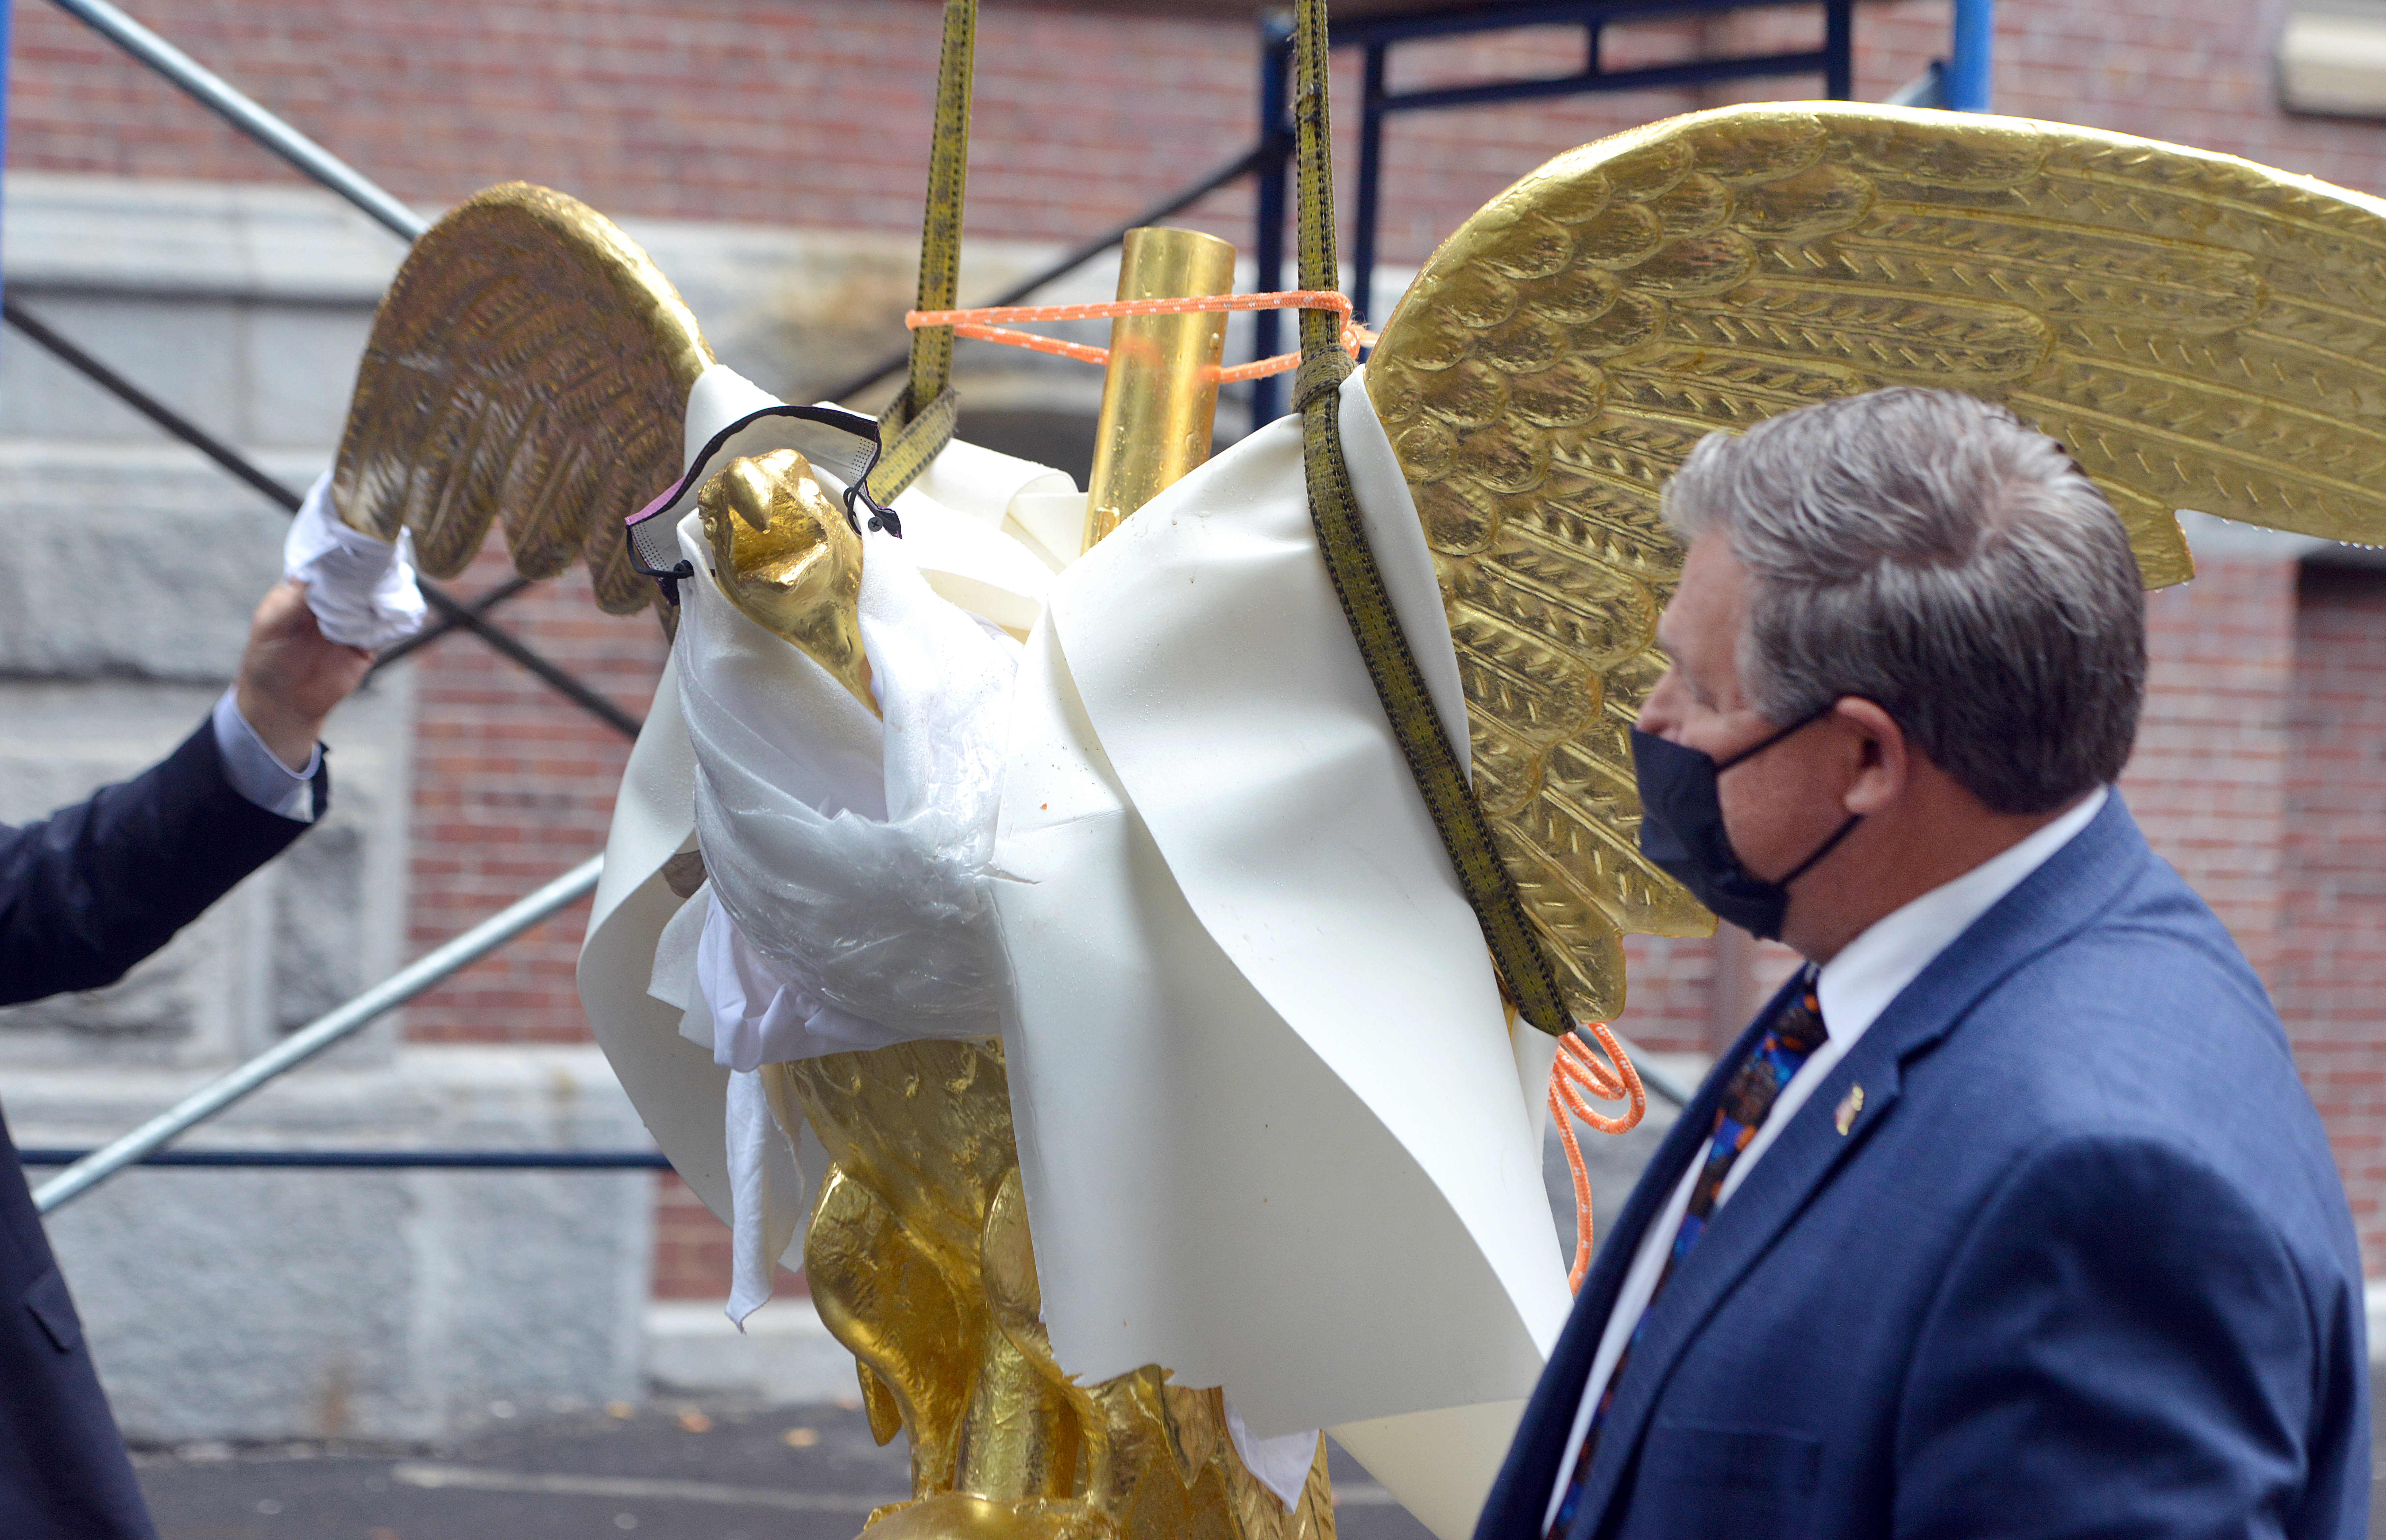 10/6/2020 -Chicopee-  Chicopee Mayor John Vieau stands next to a replica of  the "Chicopee Eagle Weathervane" before it was placed on top of the City Hall Clock Tower, now undergoing renovations. The original eagle will be on display in the City Hall auditorium once building renovations are complete.   (Don Treeger / The Republican)